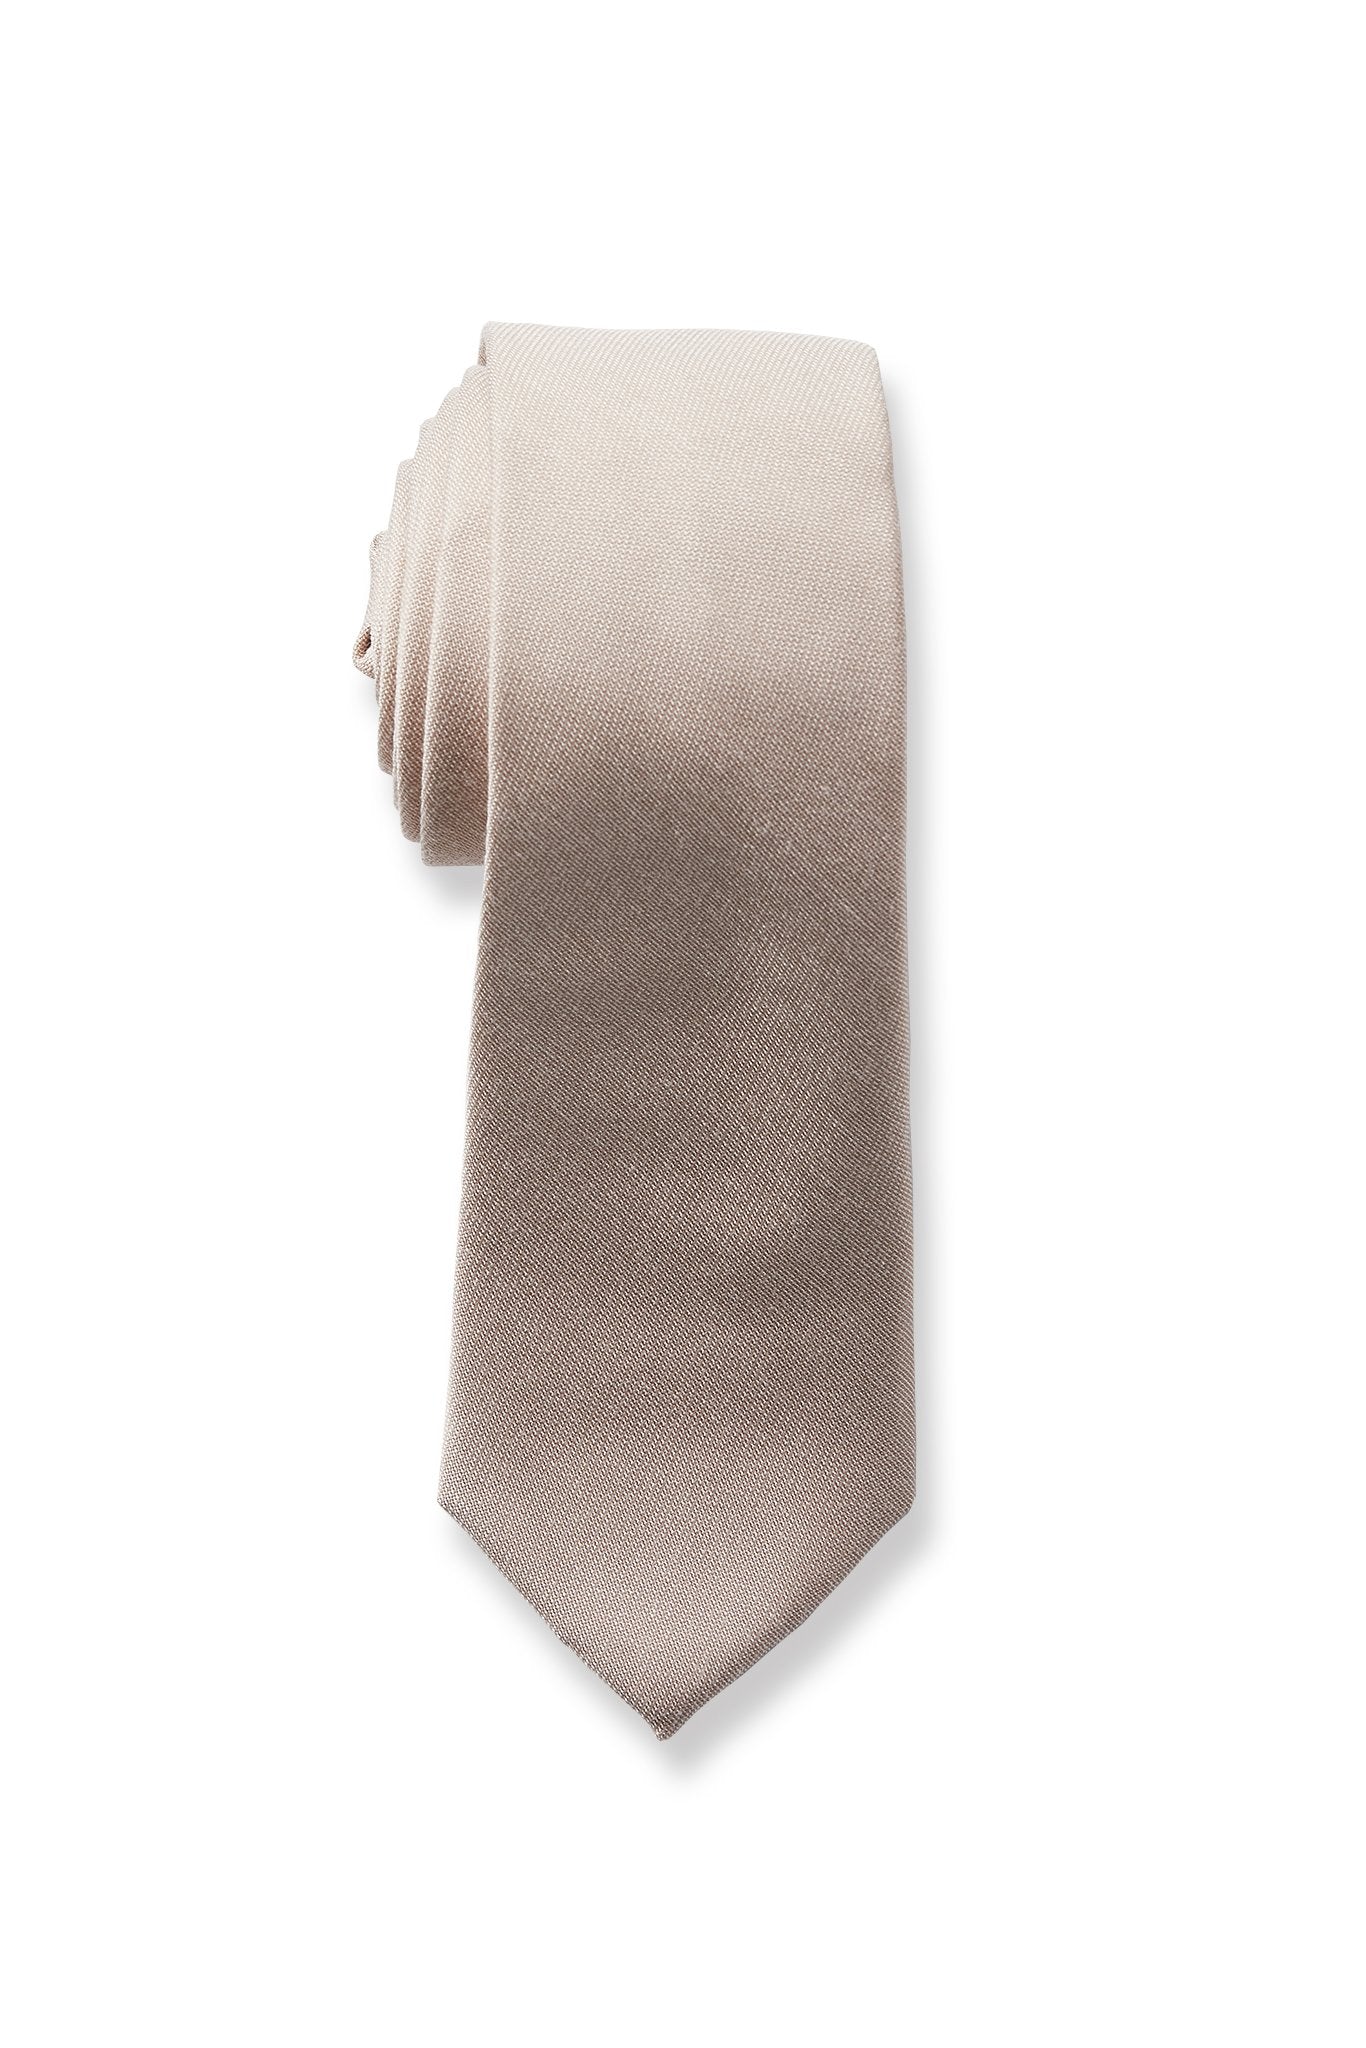 Front closeup view of the Simon Necktie in taupe rolled up with the pointed necktie end extended showing the material texture and sheen.